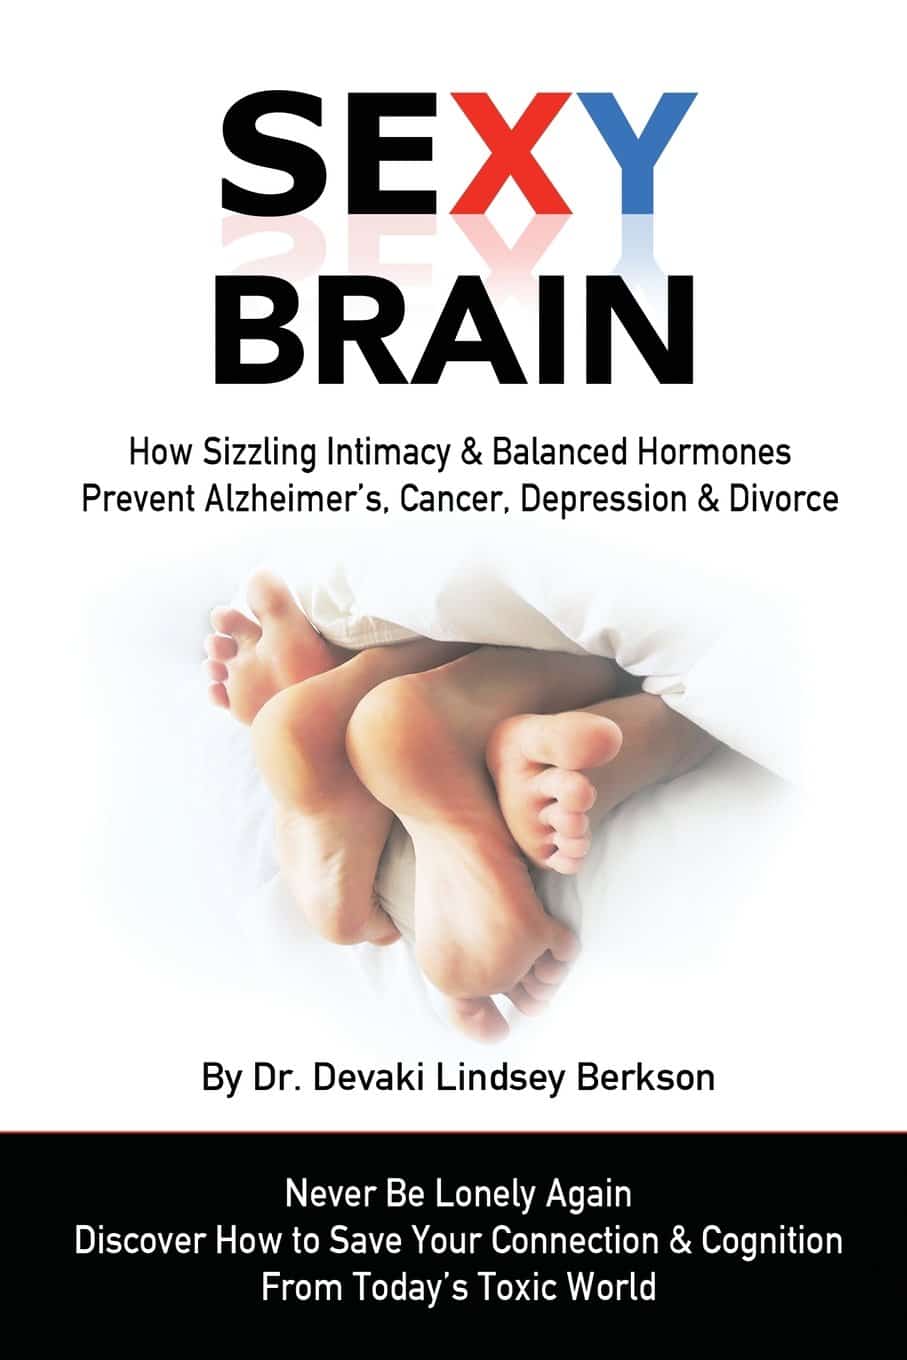 SEXY BRAIN gives you exact answers about how to protect intimacy, exact steps to be a great lover based on the hard-wired biology of estrogen and testosterone